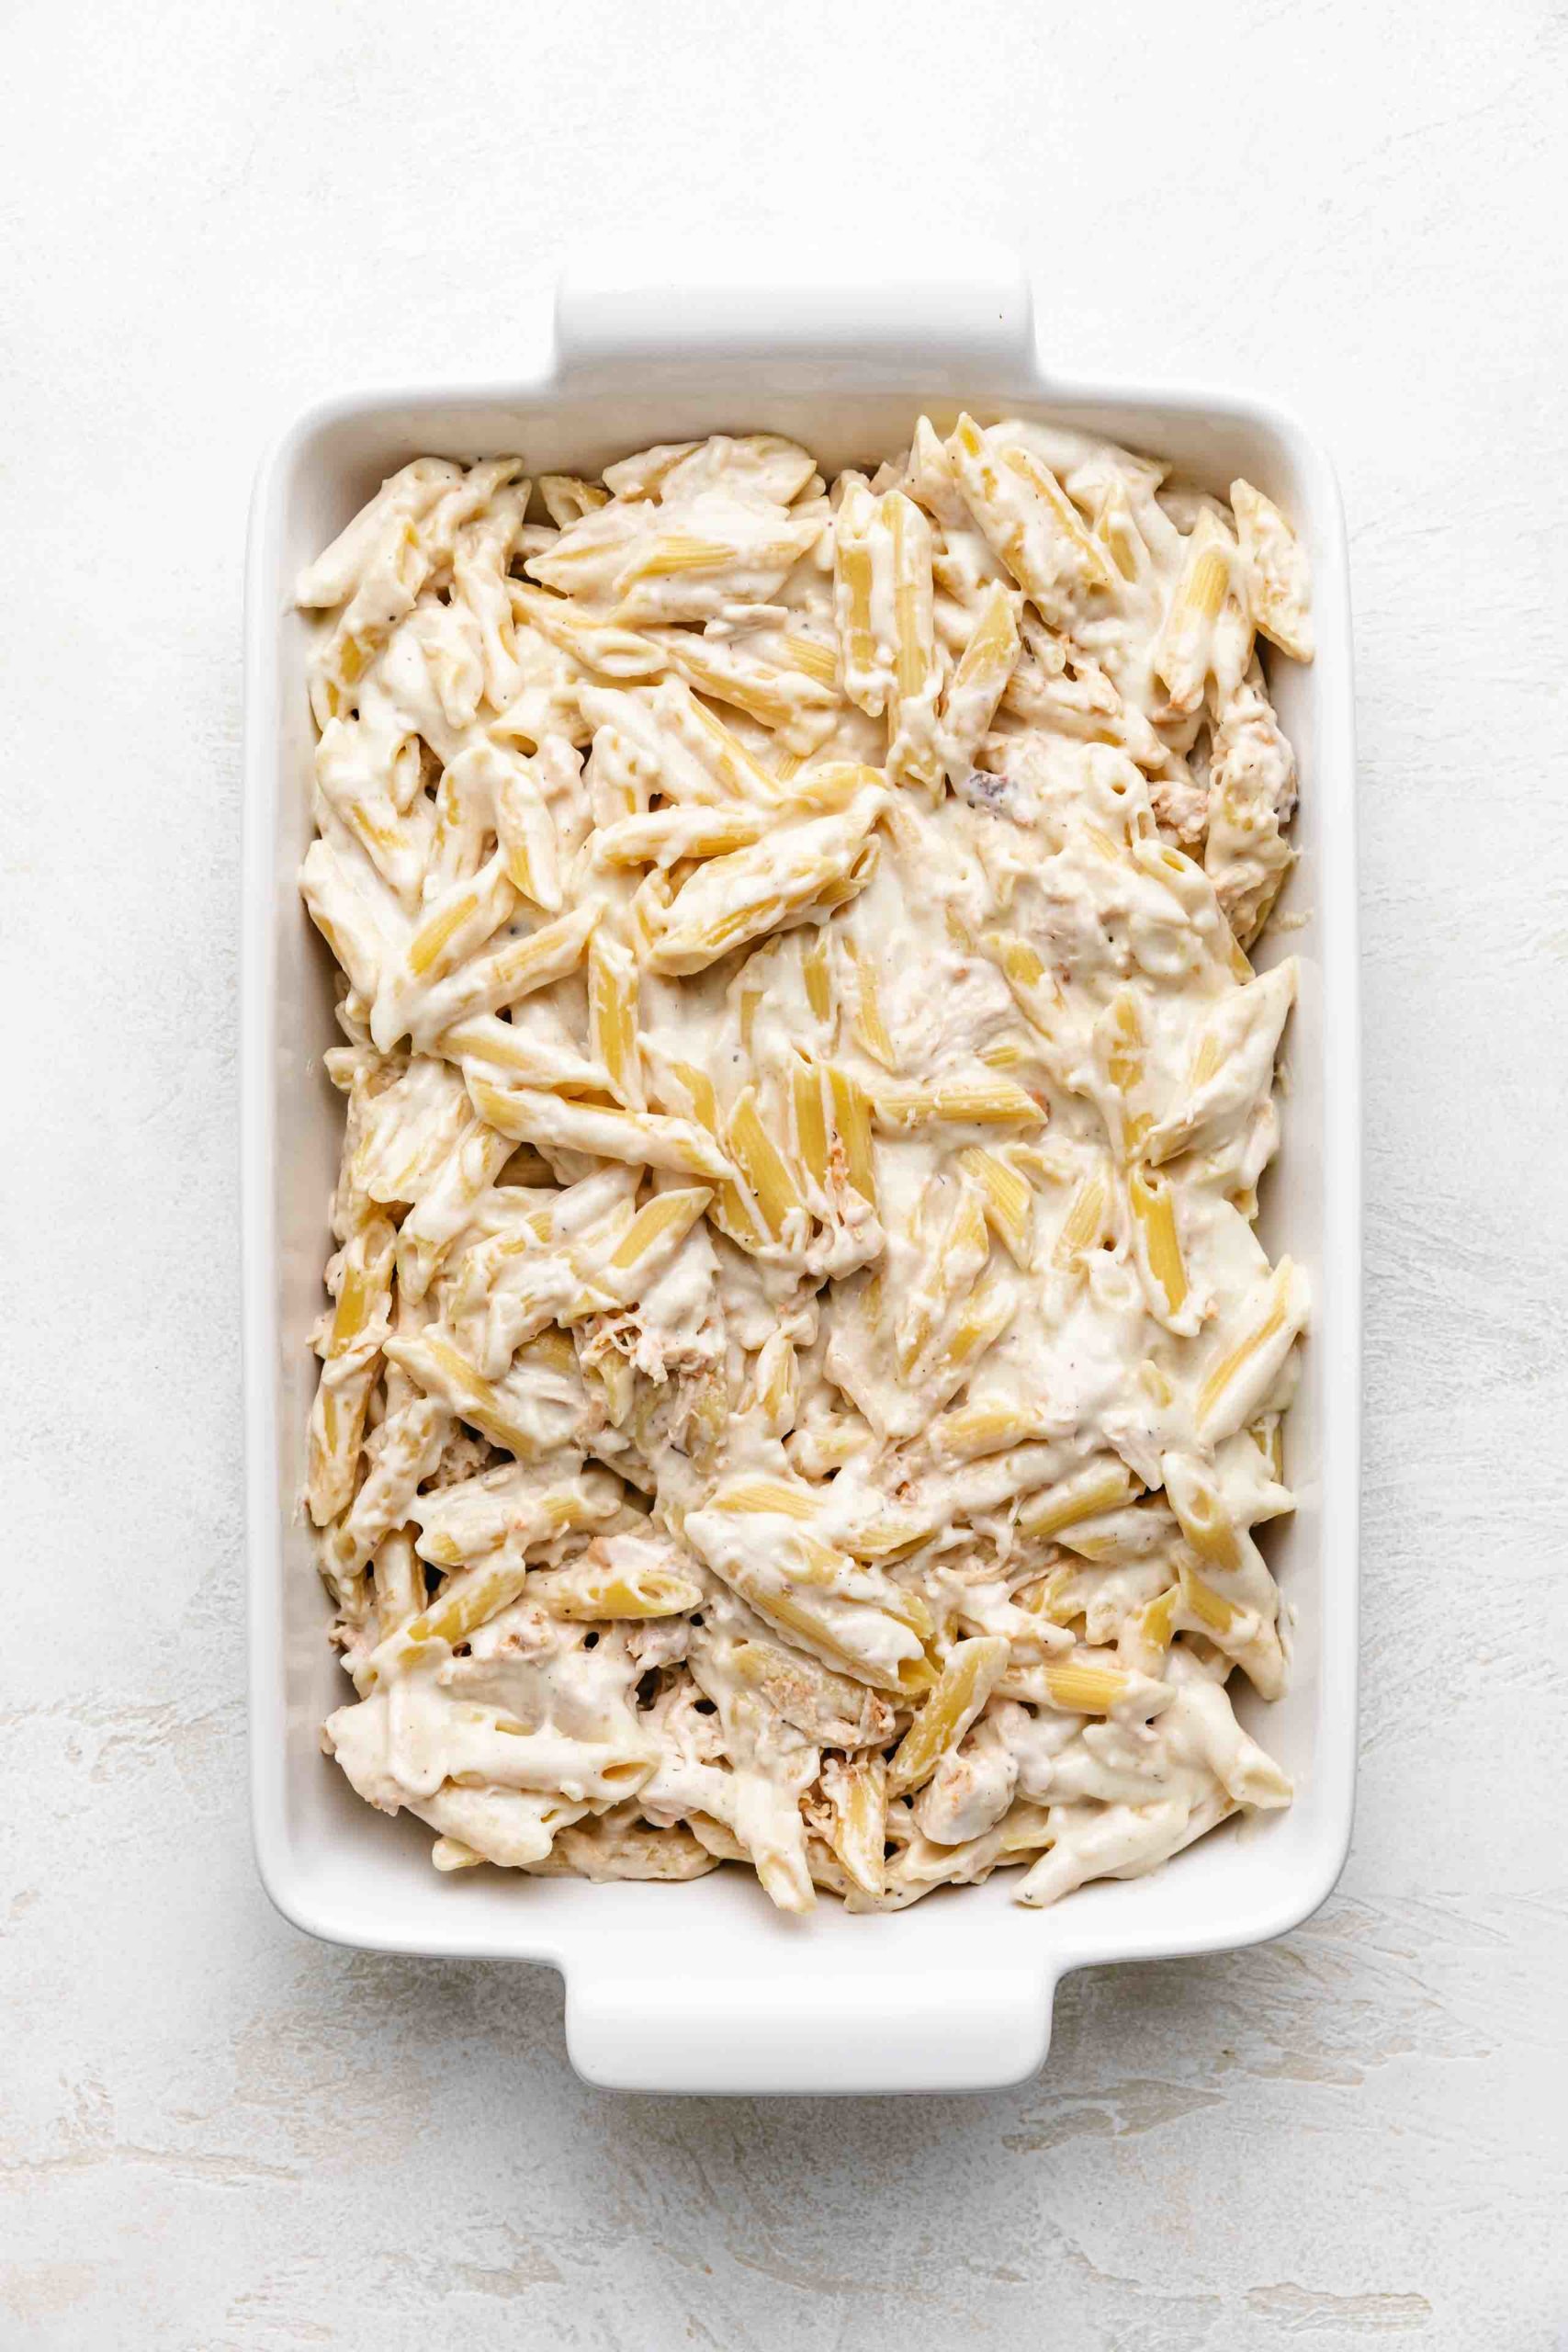 Pasta noodles, chicken and sauce in a baking dish.